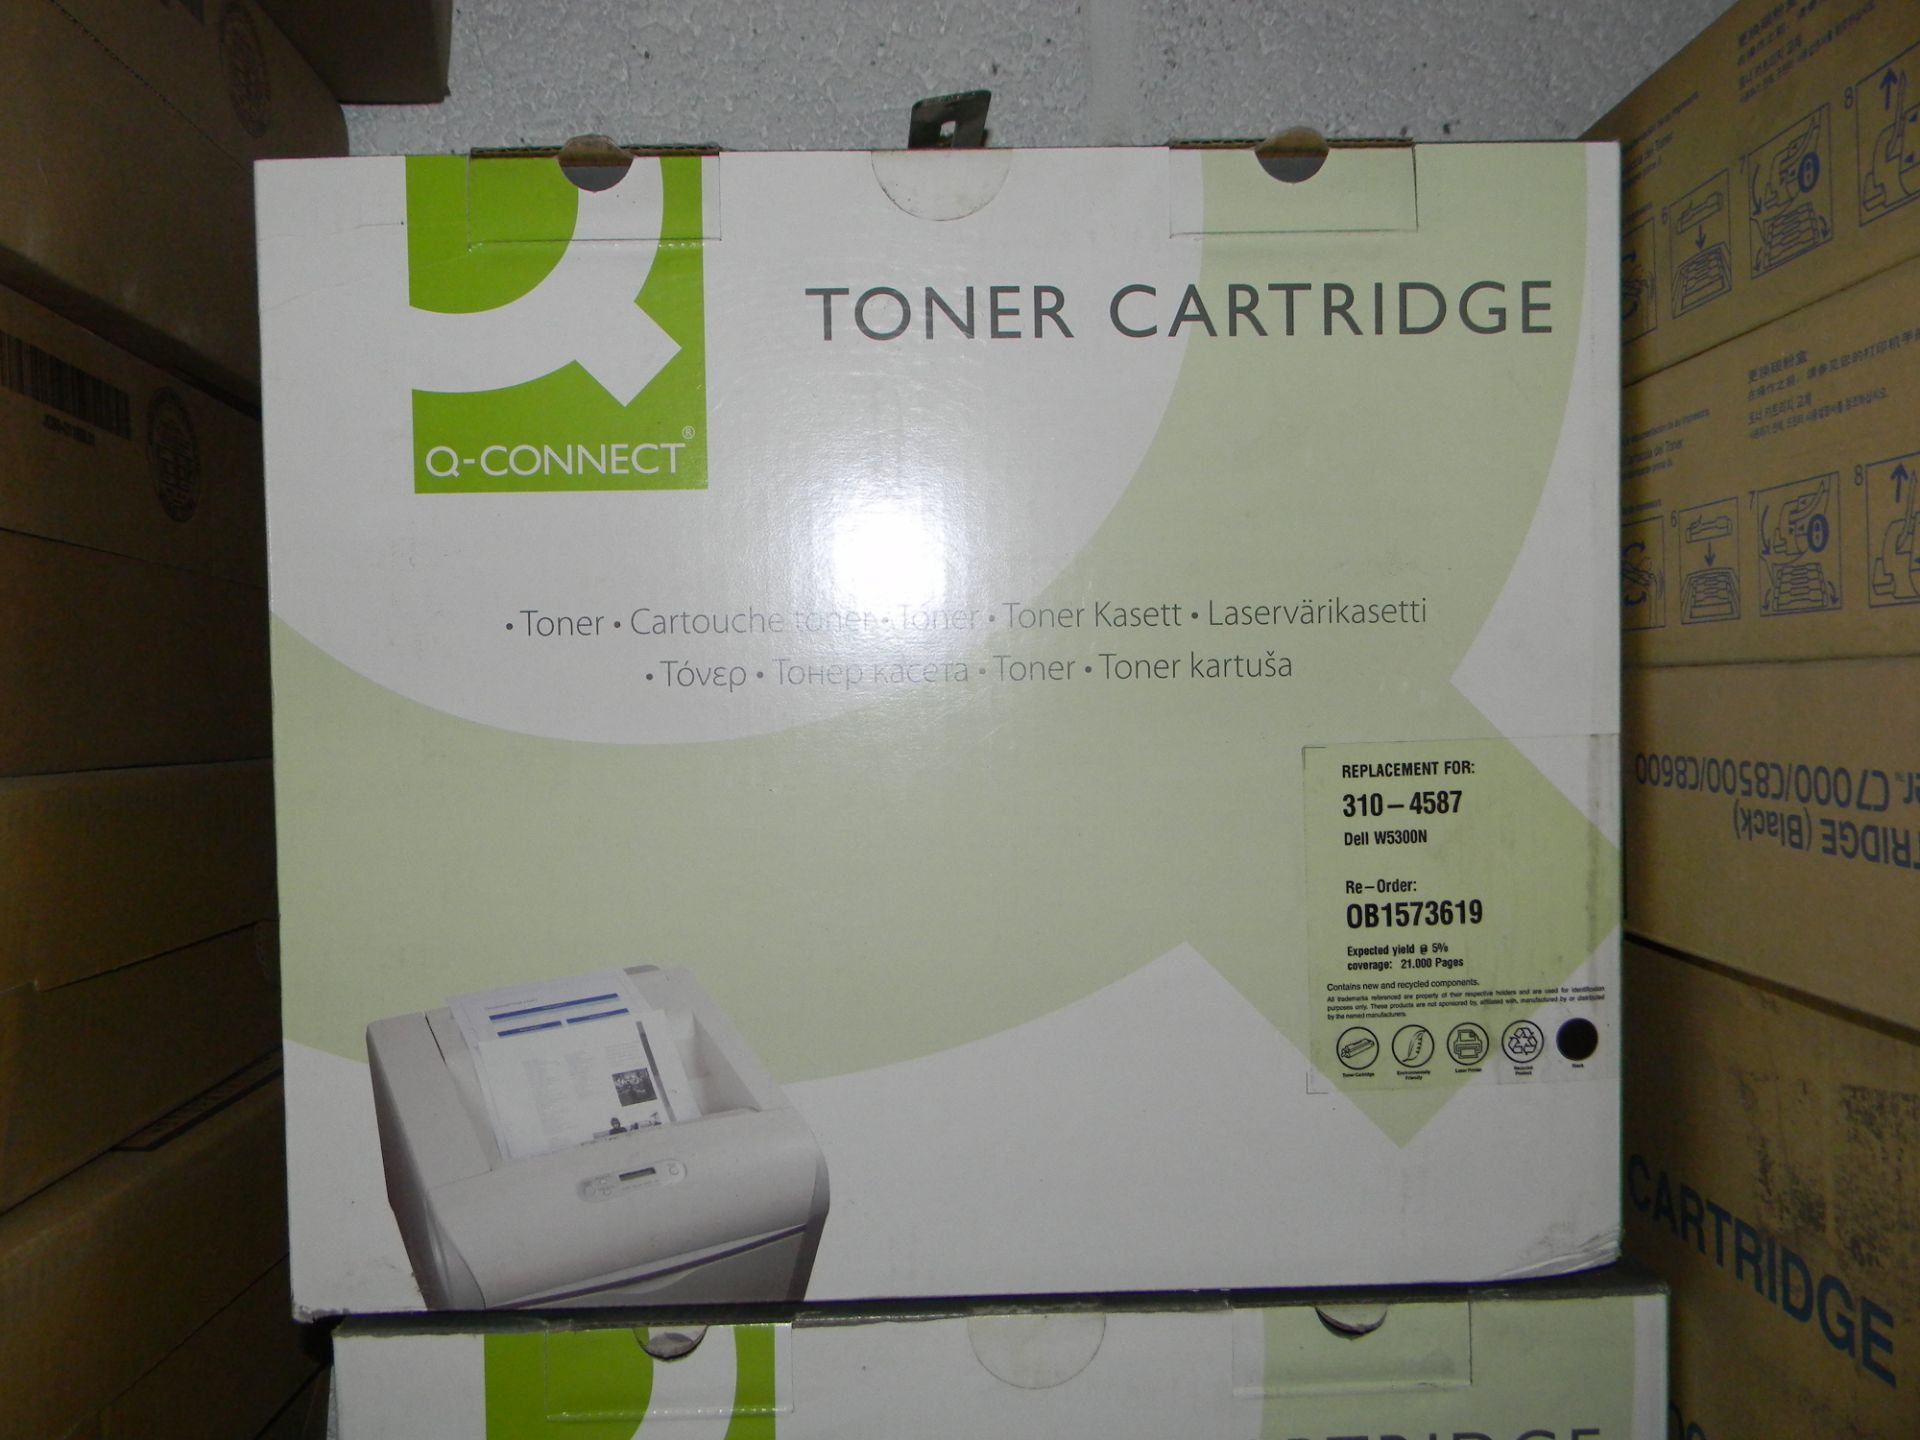 2 x Q-Connect Compatible Black Toner Cartridge for Dell W5300N - Image 2 of 2